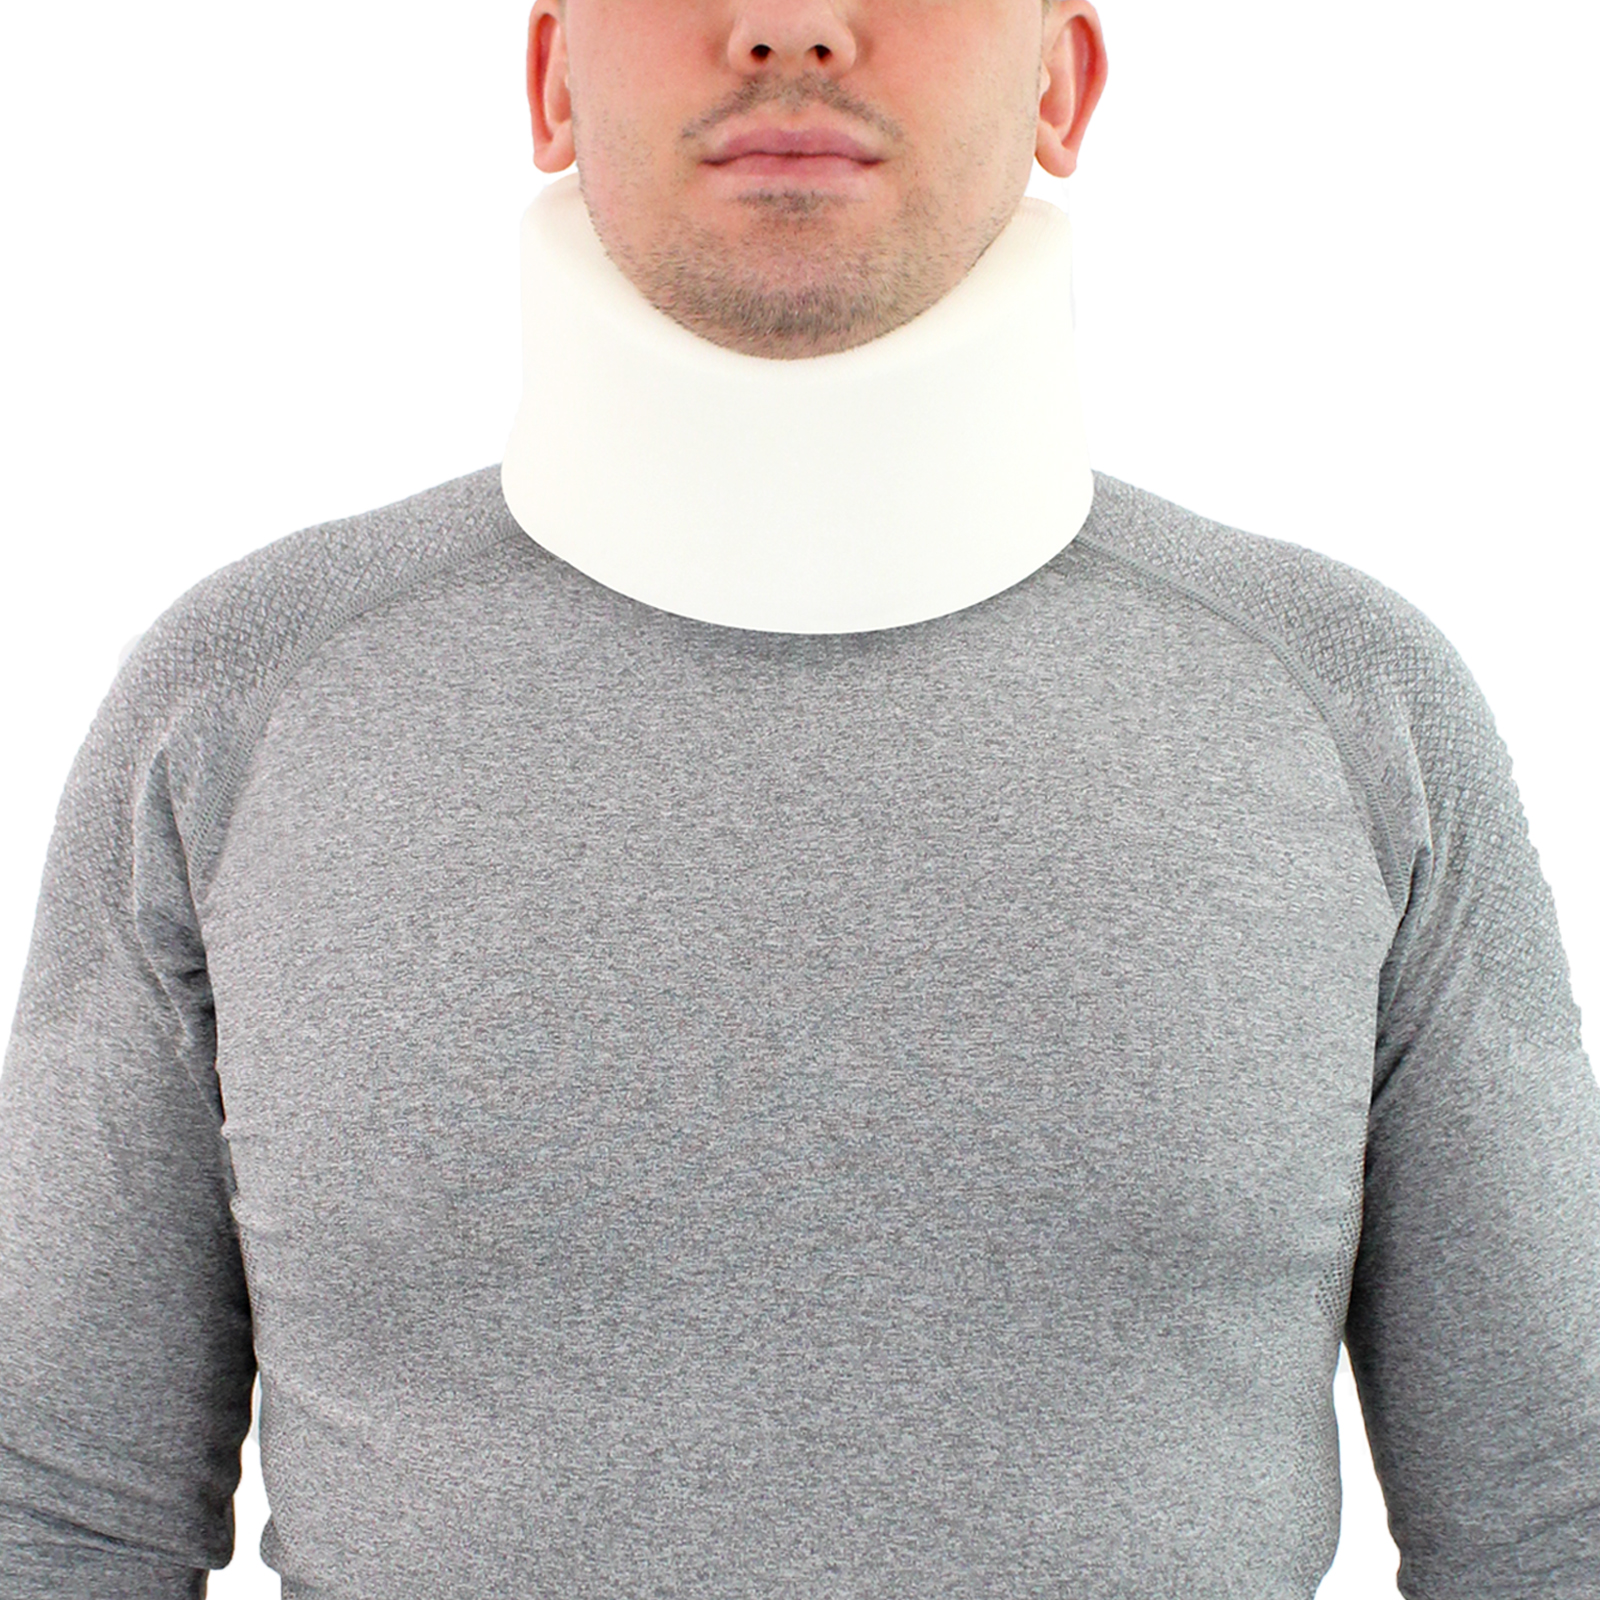 Orthopaedic Neck Support, Neck Collar, Neck Brace, Head Support